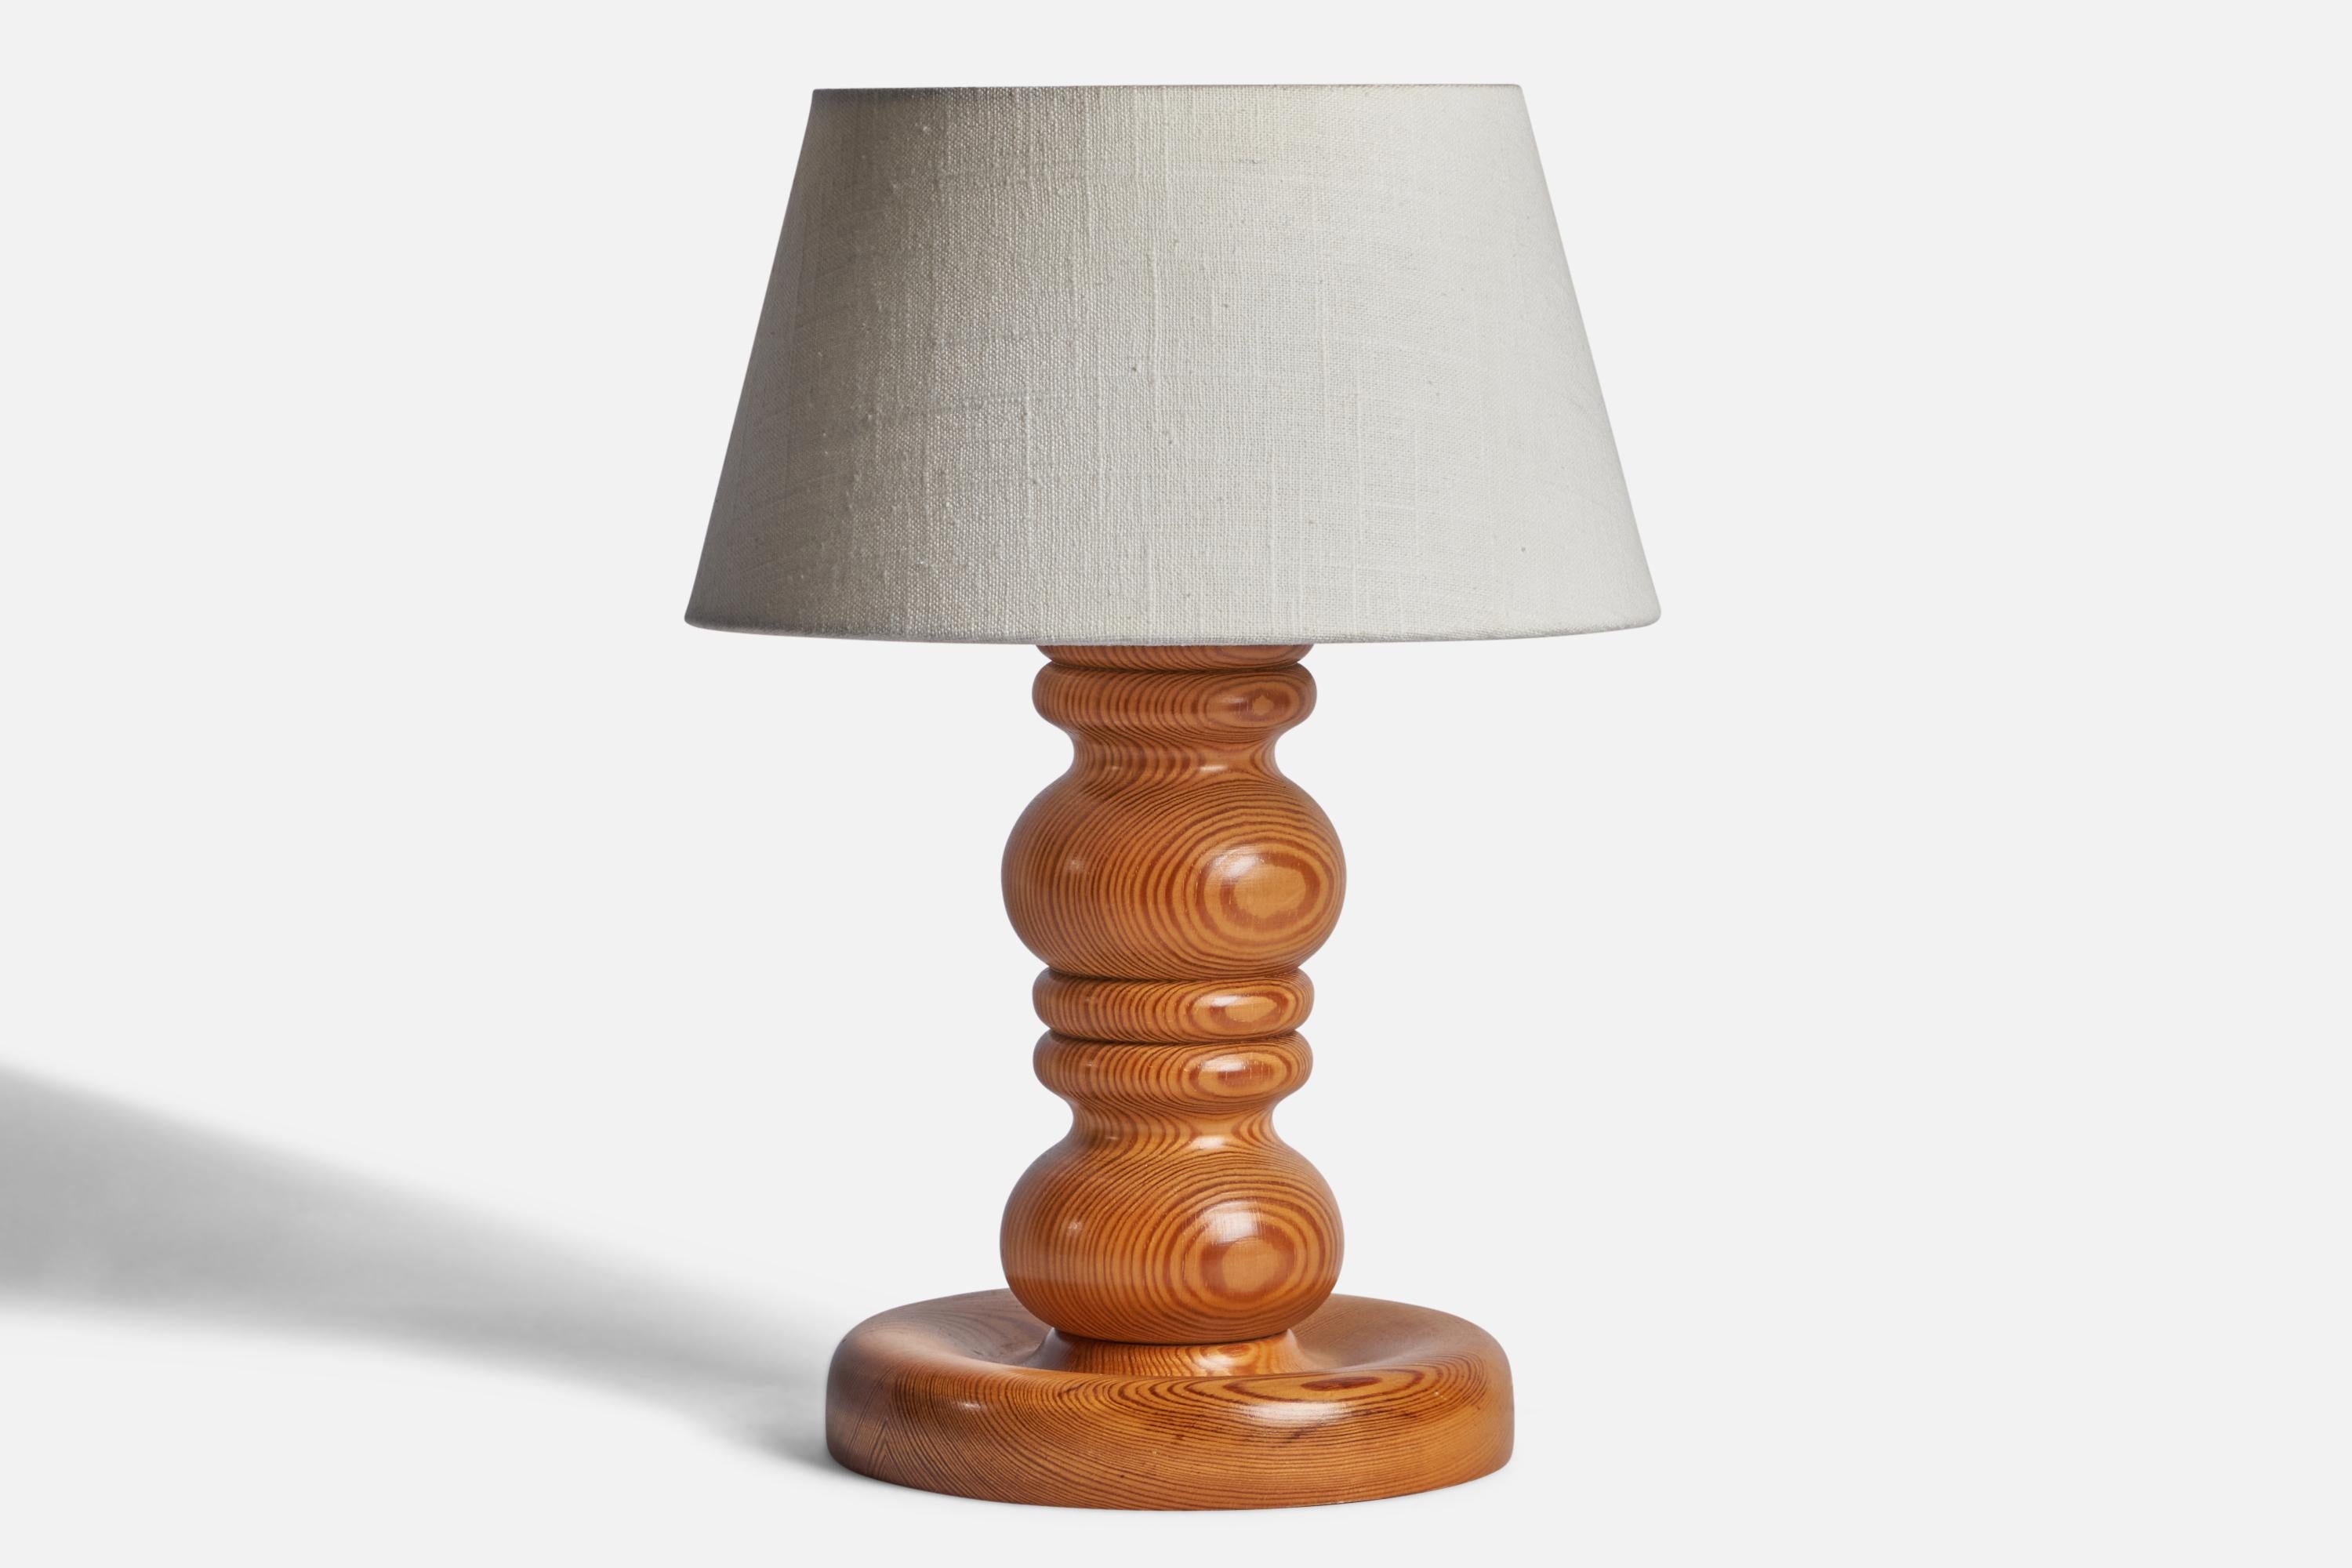 A pine table lamp designed and produced in Sweden, 1970s.

Dimensions of Lamp (inches): 11.25” H x 7.2” Diameter
Dimensions of Shade (inches): 7” Top Diameter x 10” Bottom Diameter x 5.5” H 
Dimensions of Lamp with Shade (inches): 14.5” H x 10”